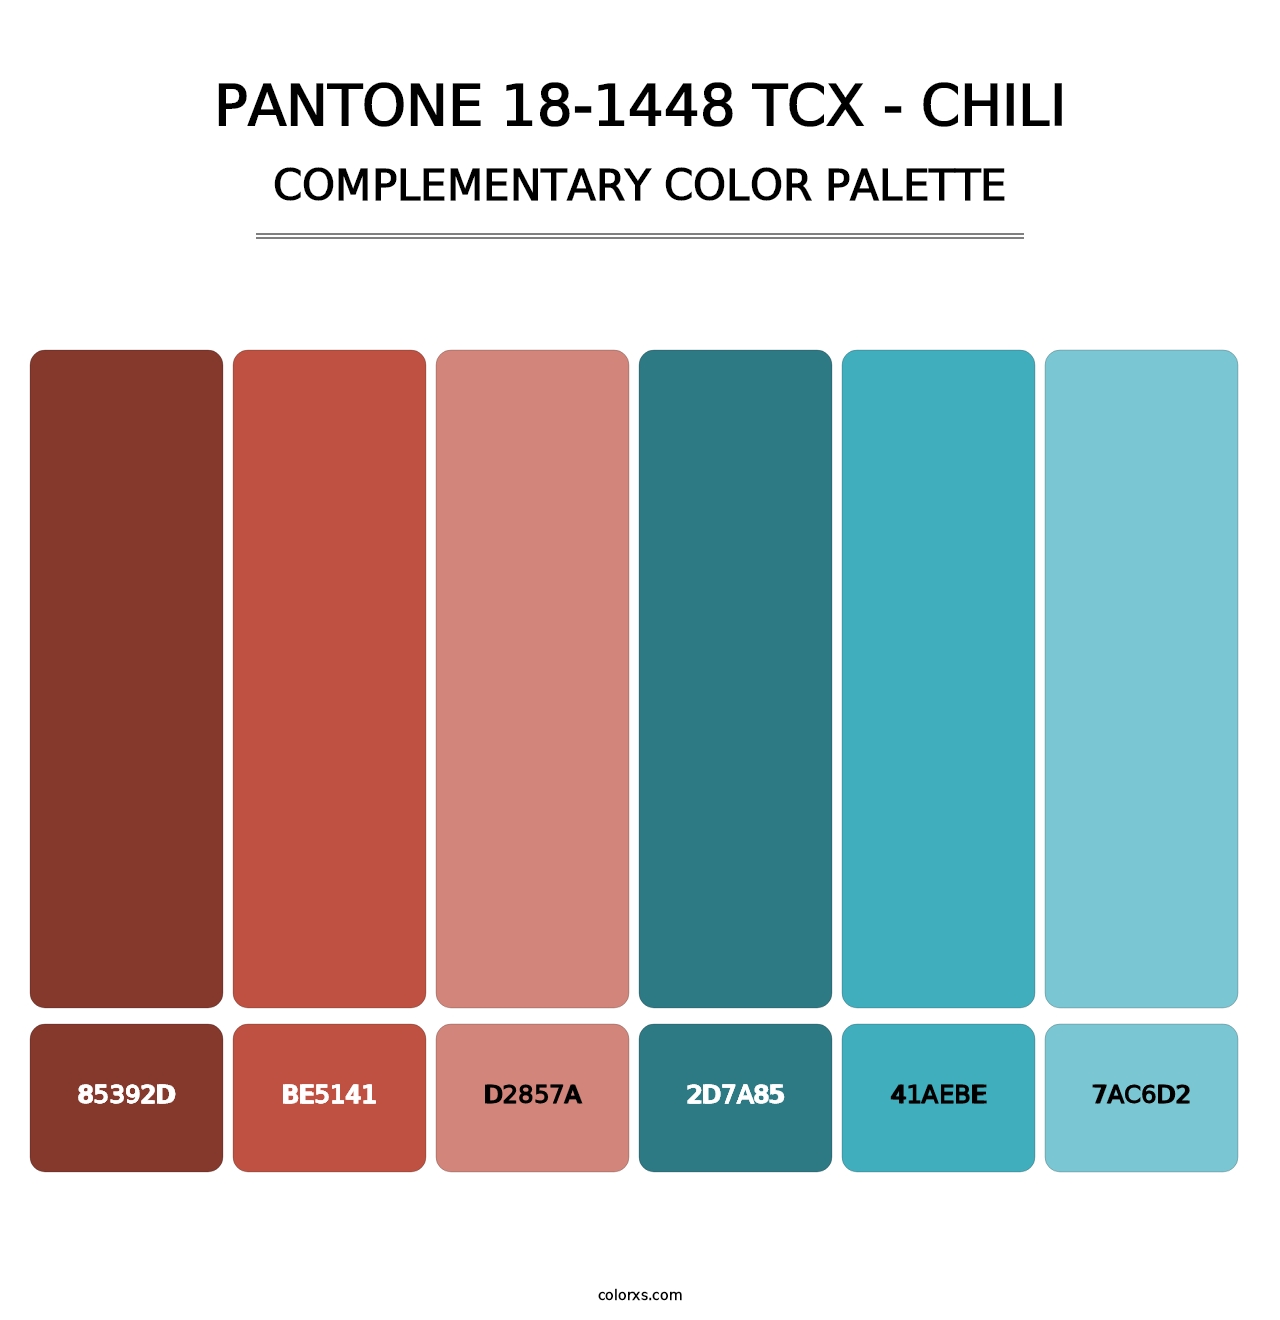 PANTONE 18-1448 TCX - Chili - Complementary Color Palette